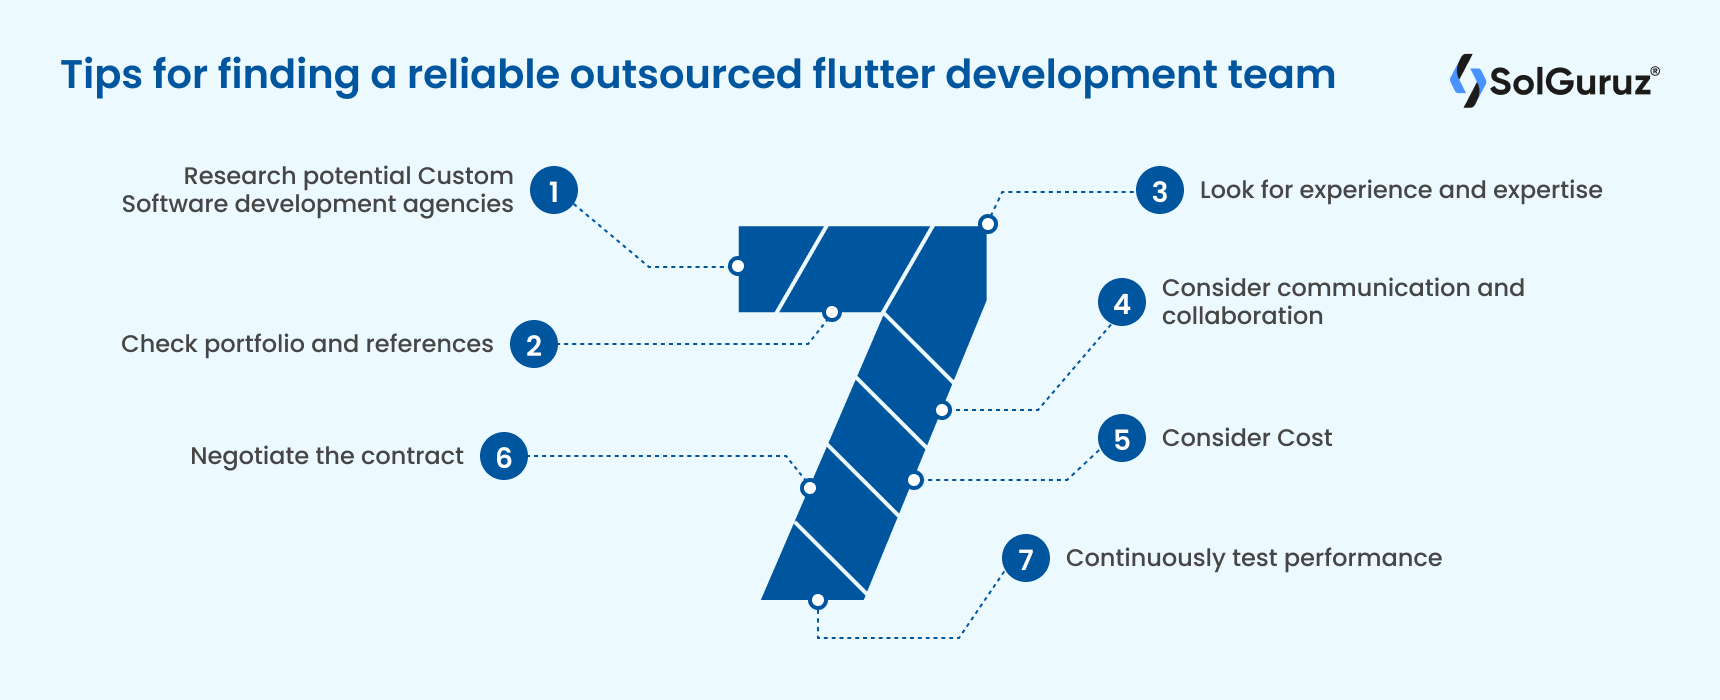 Tips for finding a reliable outsourced flutter development team